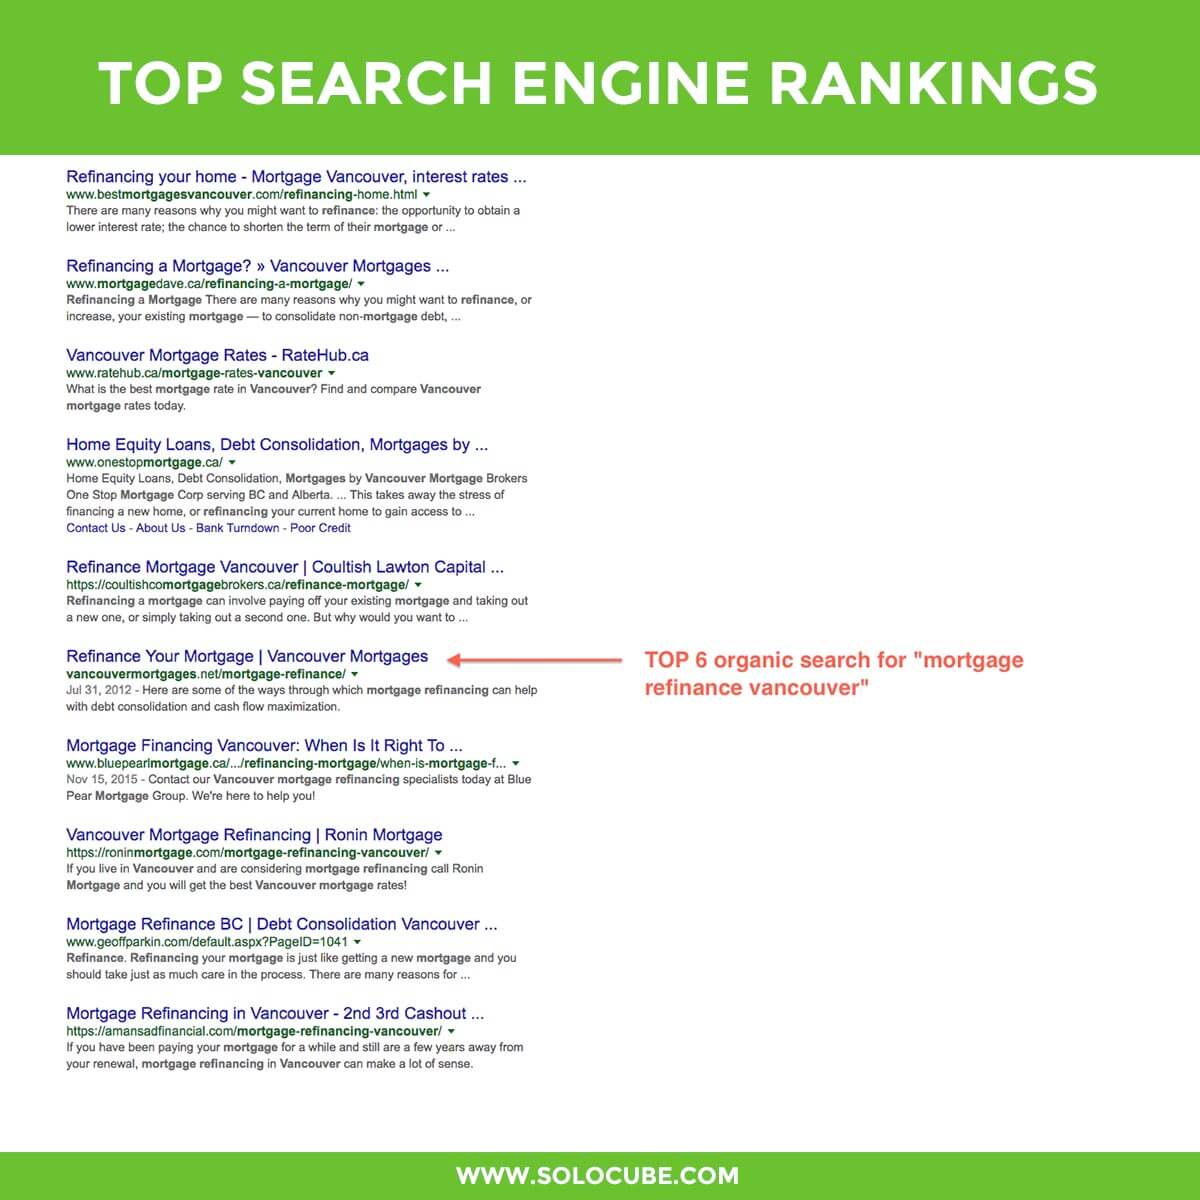 top SEO google ranking by solocube 09 - SEO Vancouver, BC